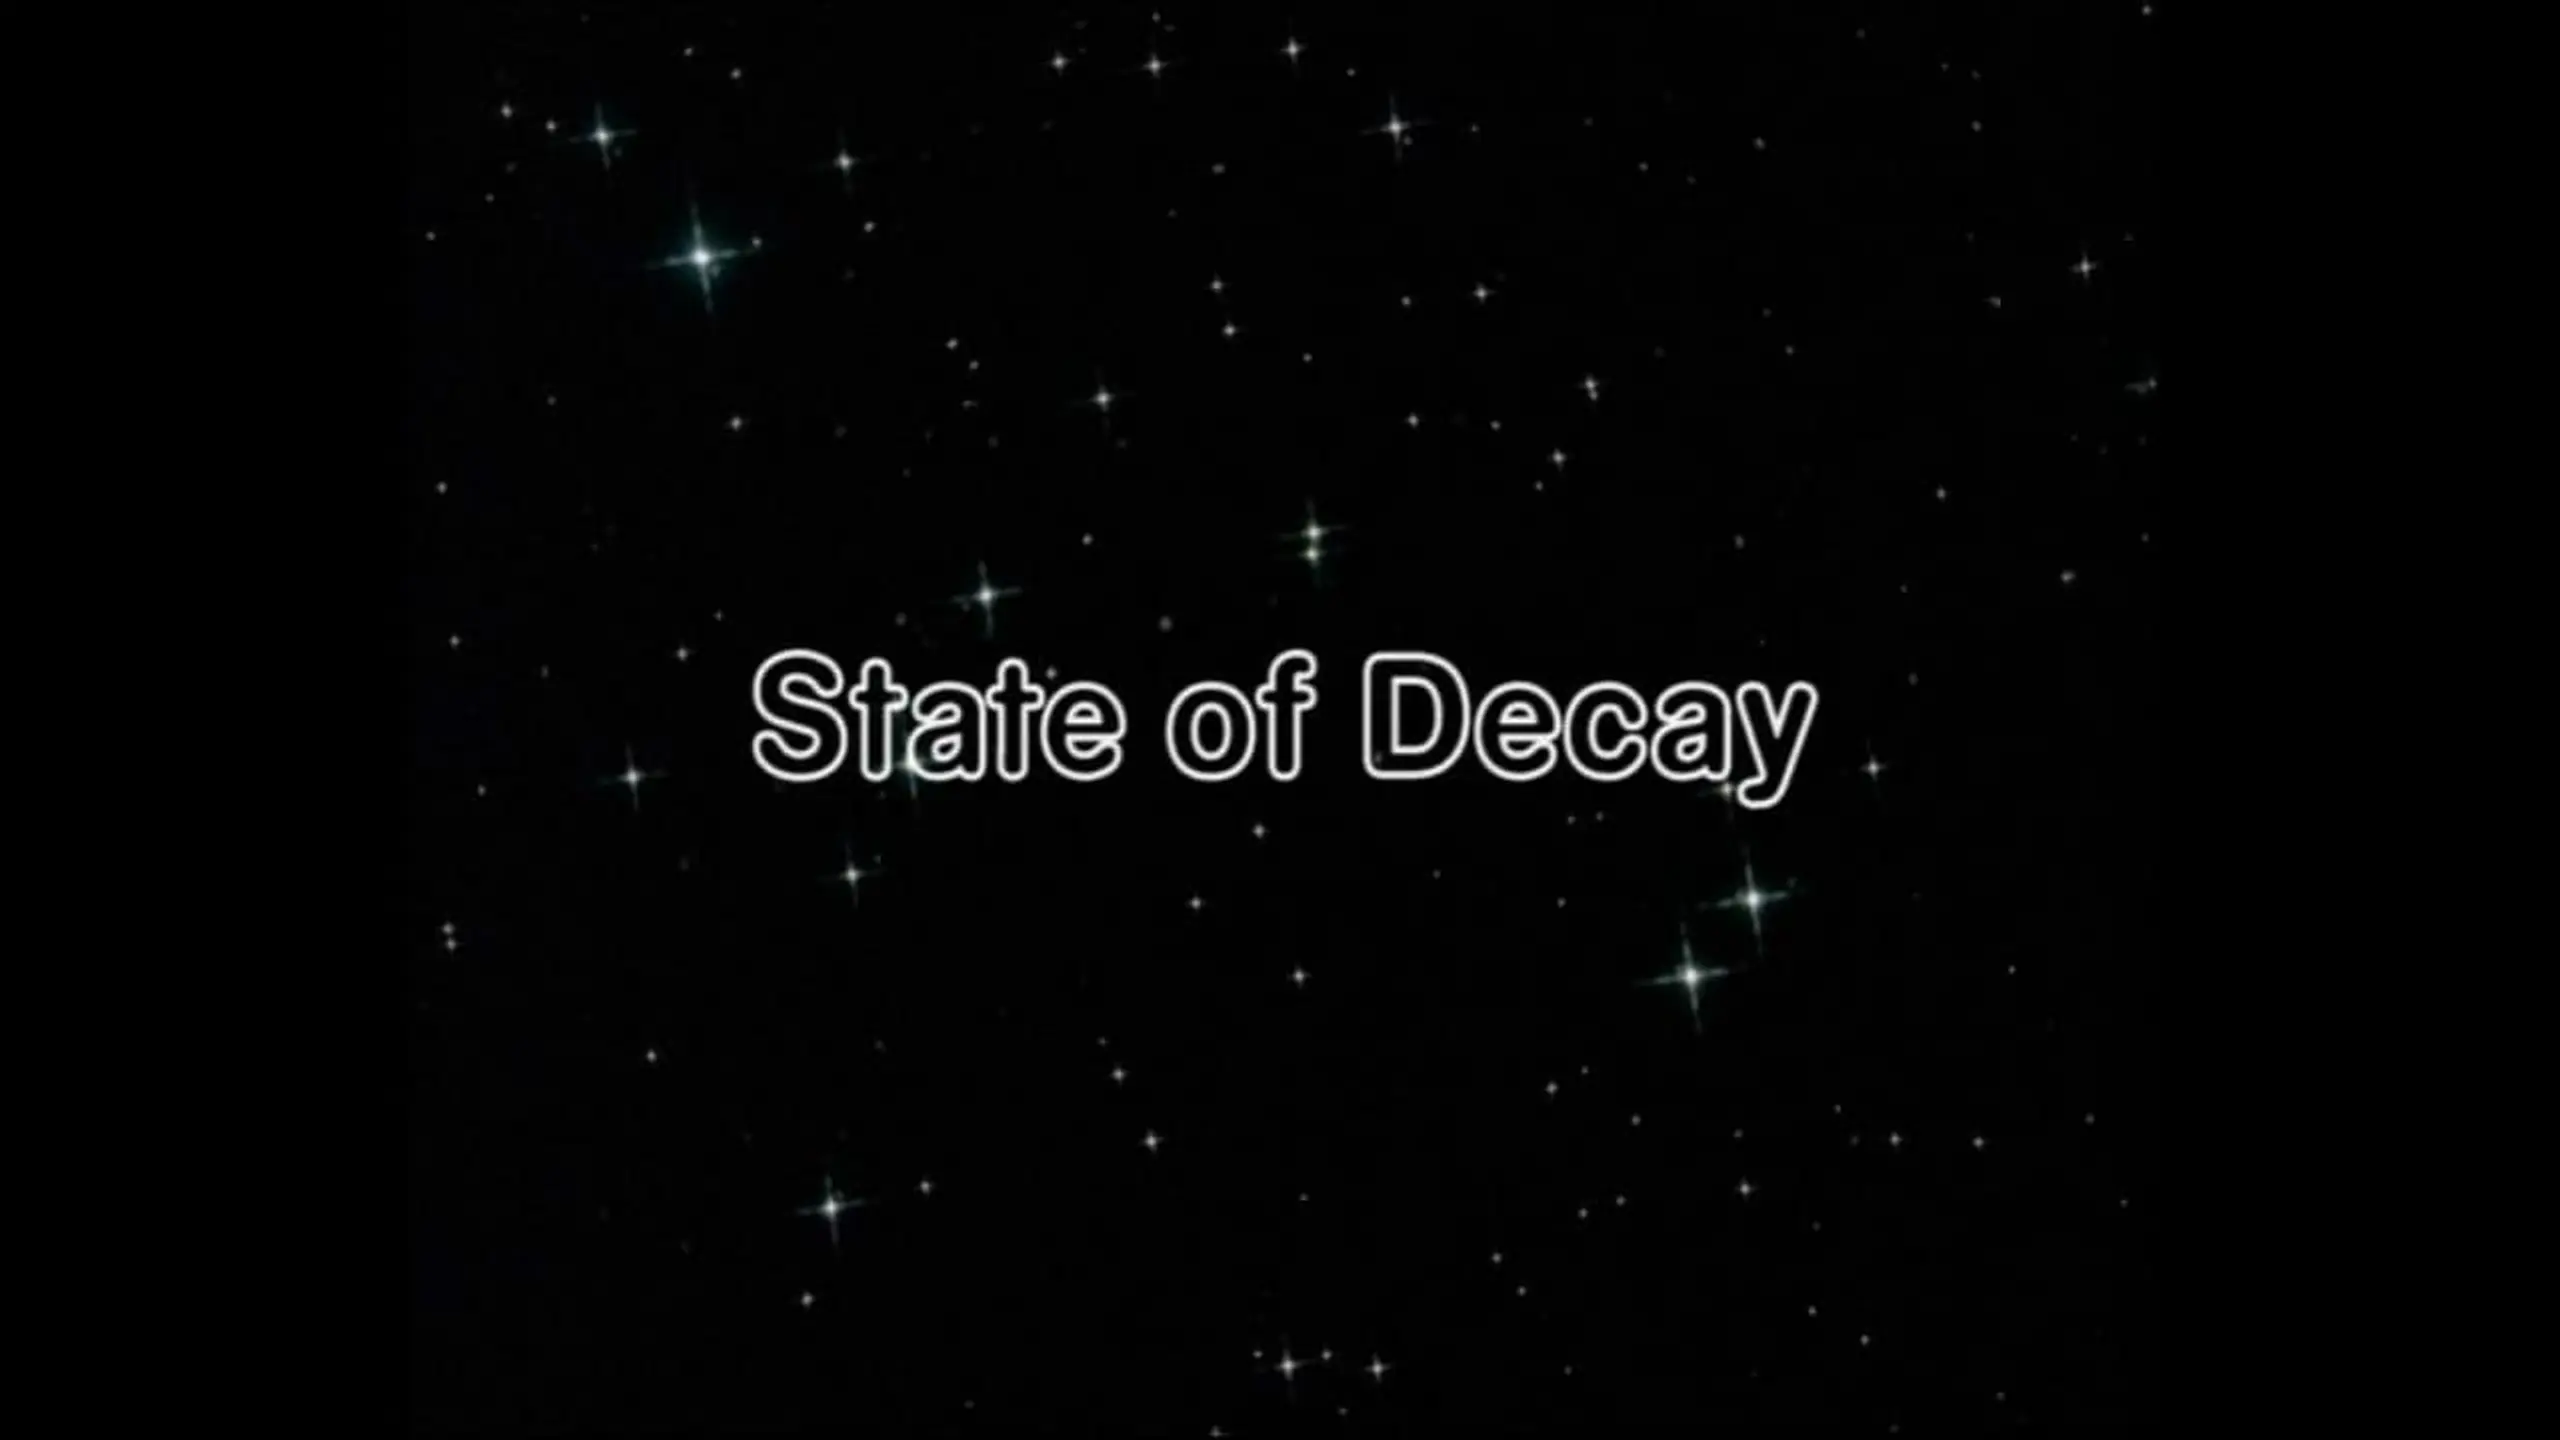 Doctor Who: State of Decay